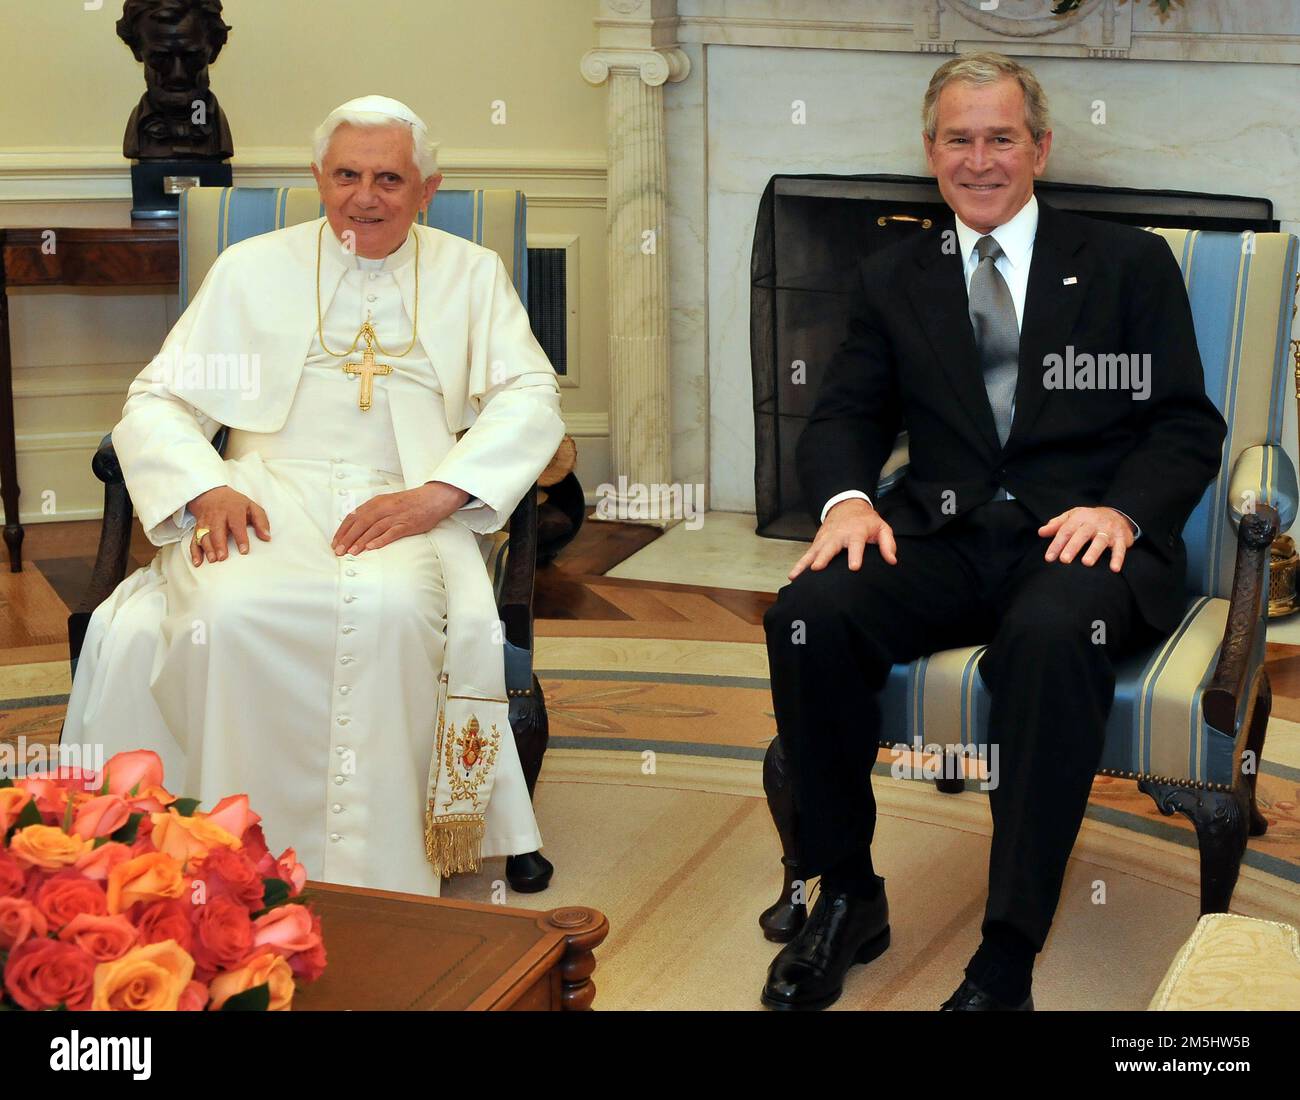 Washington, United States Of America. 16th Apr, 2008. Pope Benedict XVI and United States President George W. Bush pose for a photo in the Oval Office at the White House in Washington, DC on Wednesday, April 16, 2008. Credit: Ron Sachs/CNP/Sipa USA.(RESTRICTION: NO New York or New Jersey Newspapers or newspapers within a 75 mile radius of New York City) Credit: Sipa USA/Alamy Live News Stock Photo